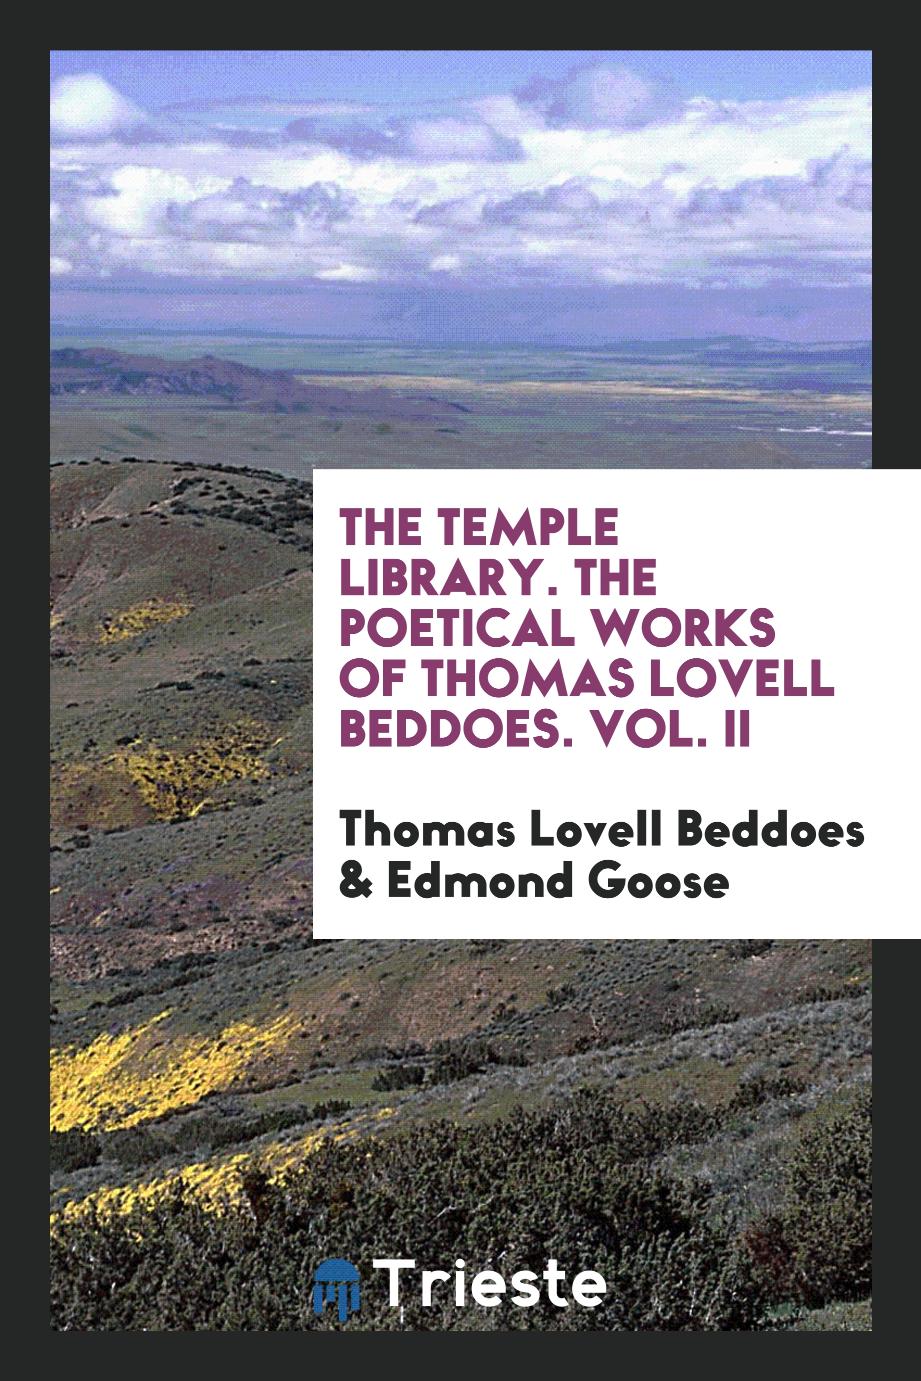 The Temple Library. The Poetical Works of Thomas Lovell Beddoes. Vol. II